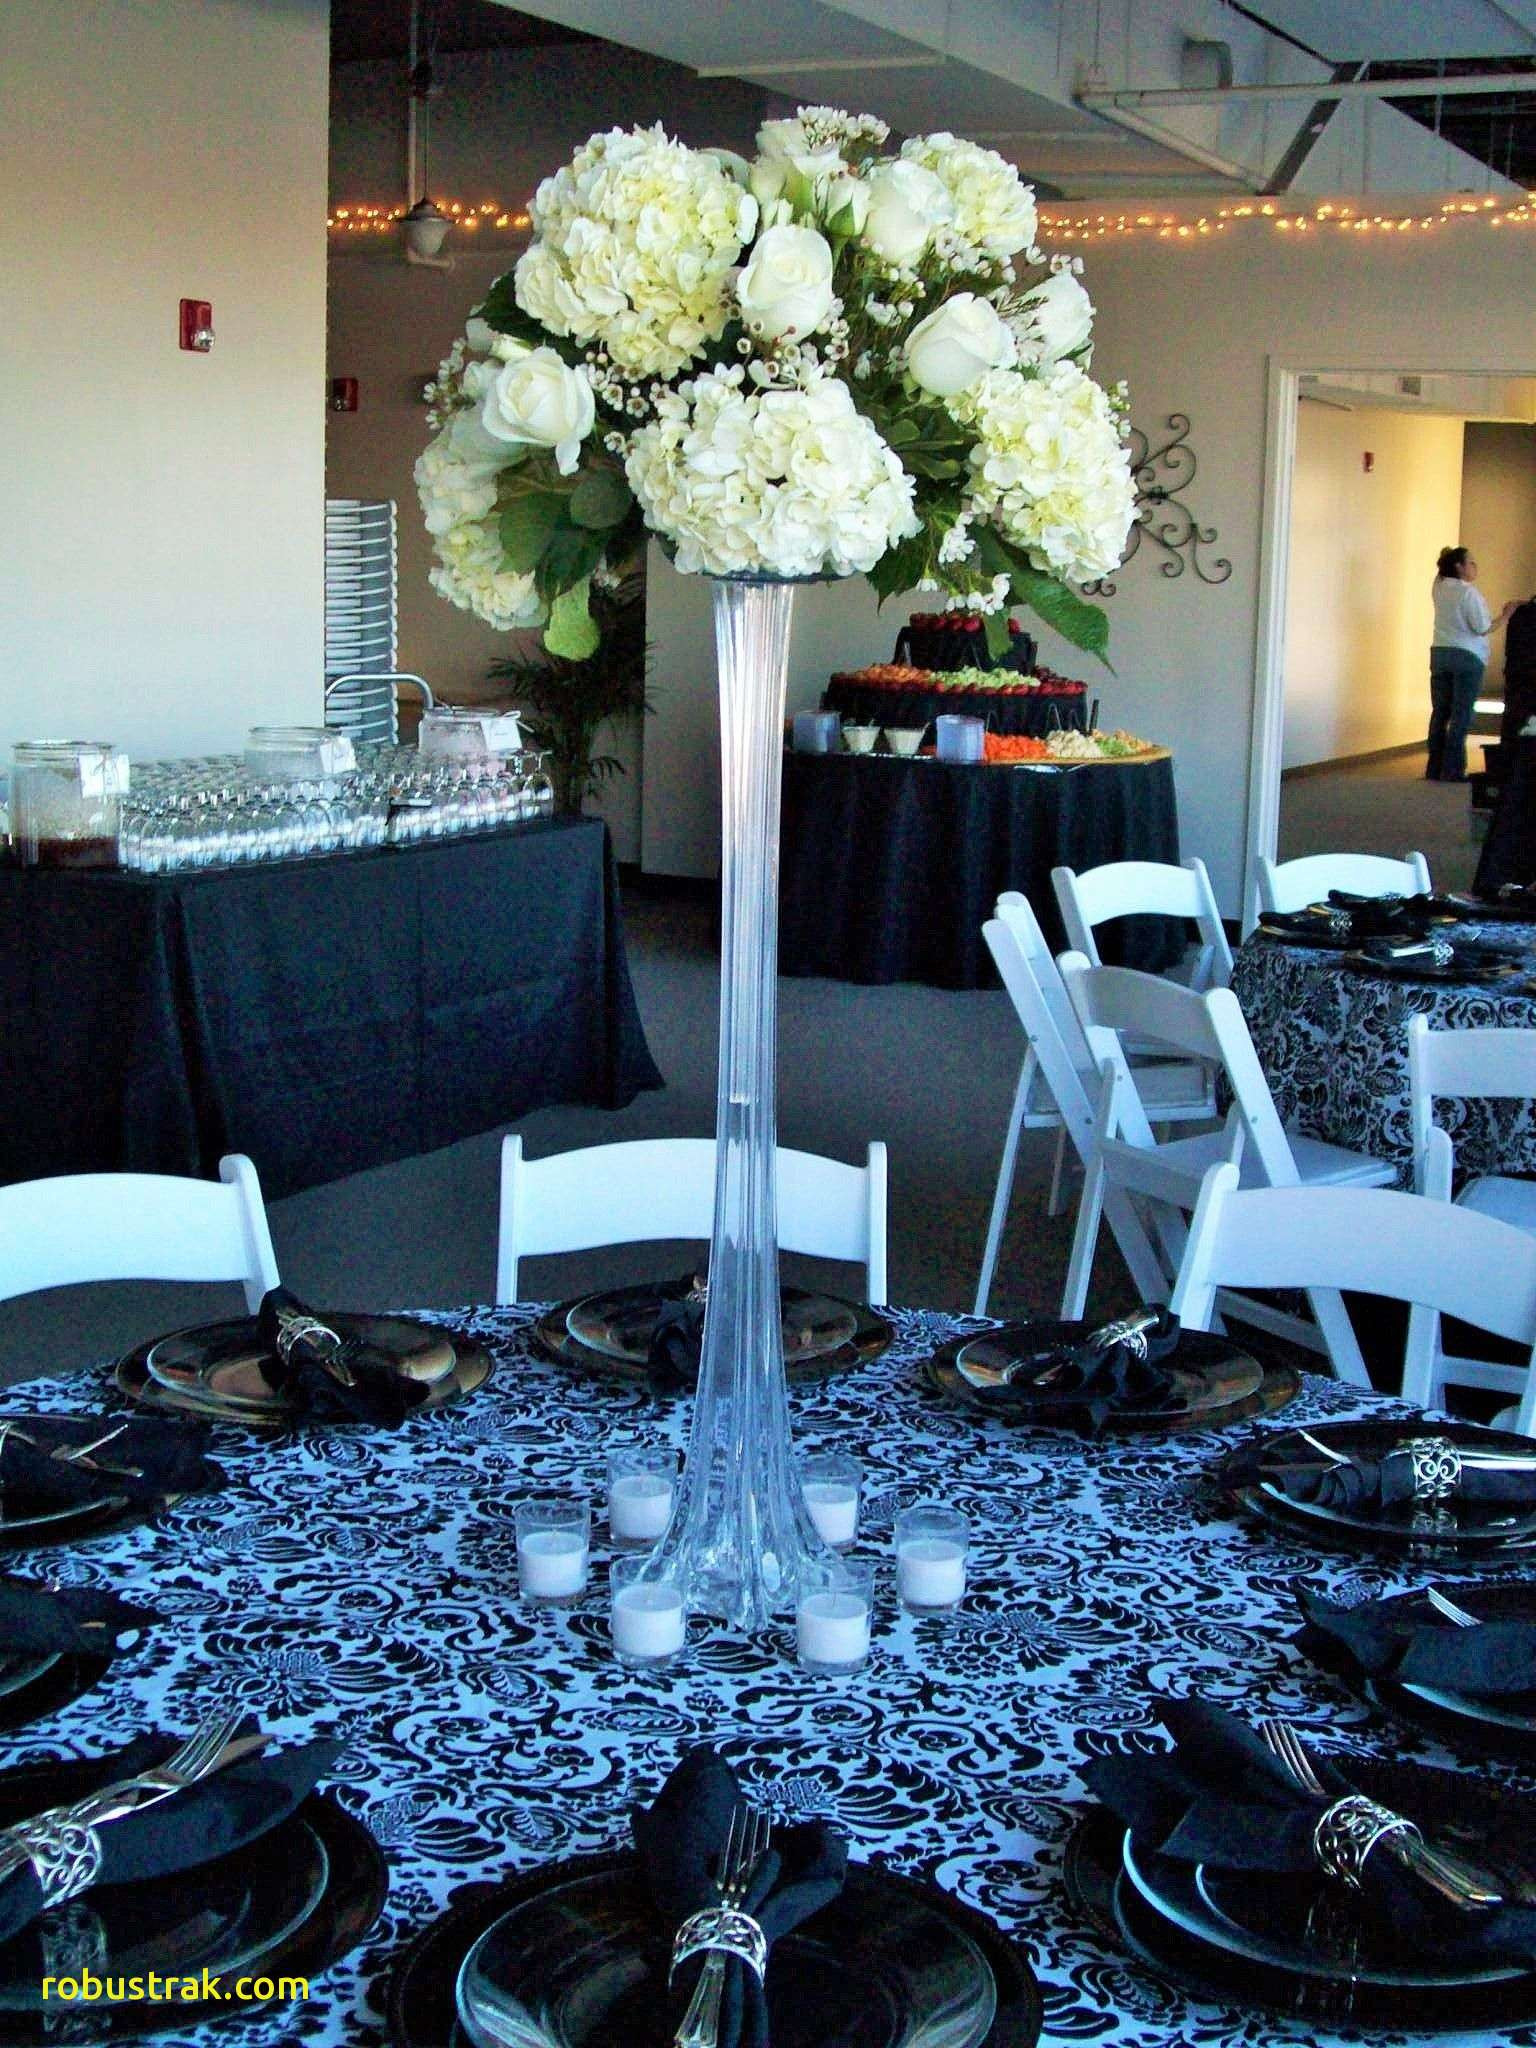 26 attractive Round Glass Vase Centerpieces 2024 free download round glass vase centerpieces of tall glass table decorations awesome tall glass vase wedding with tall glass table decorations awesome tall glass vase wedding centerpiece with white hydrang